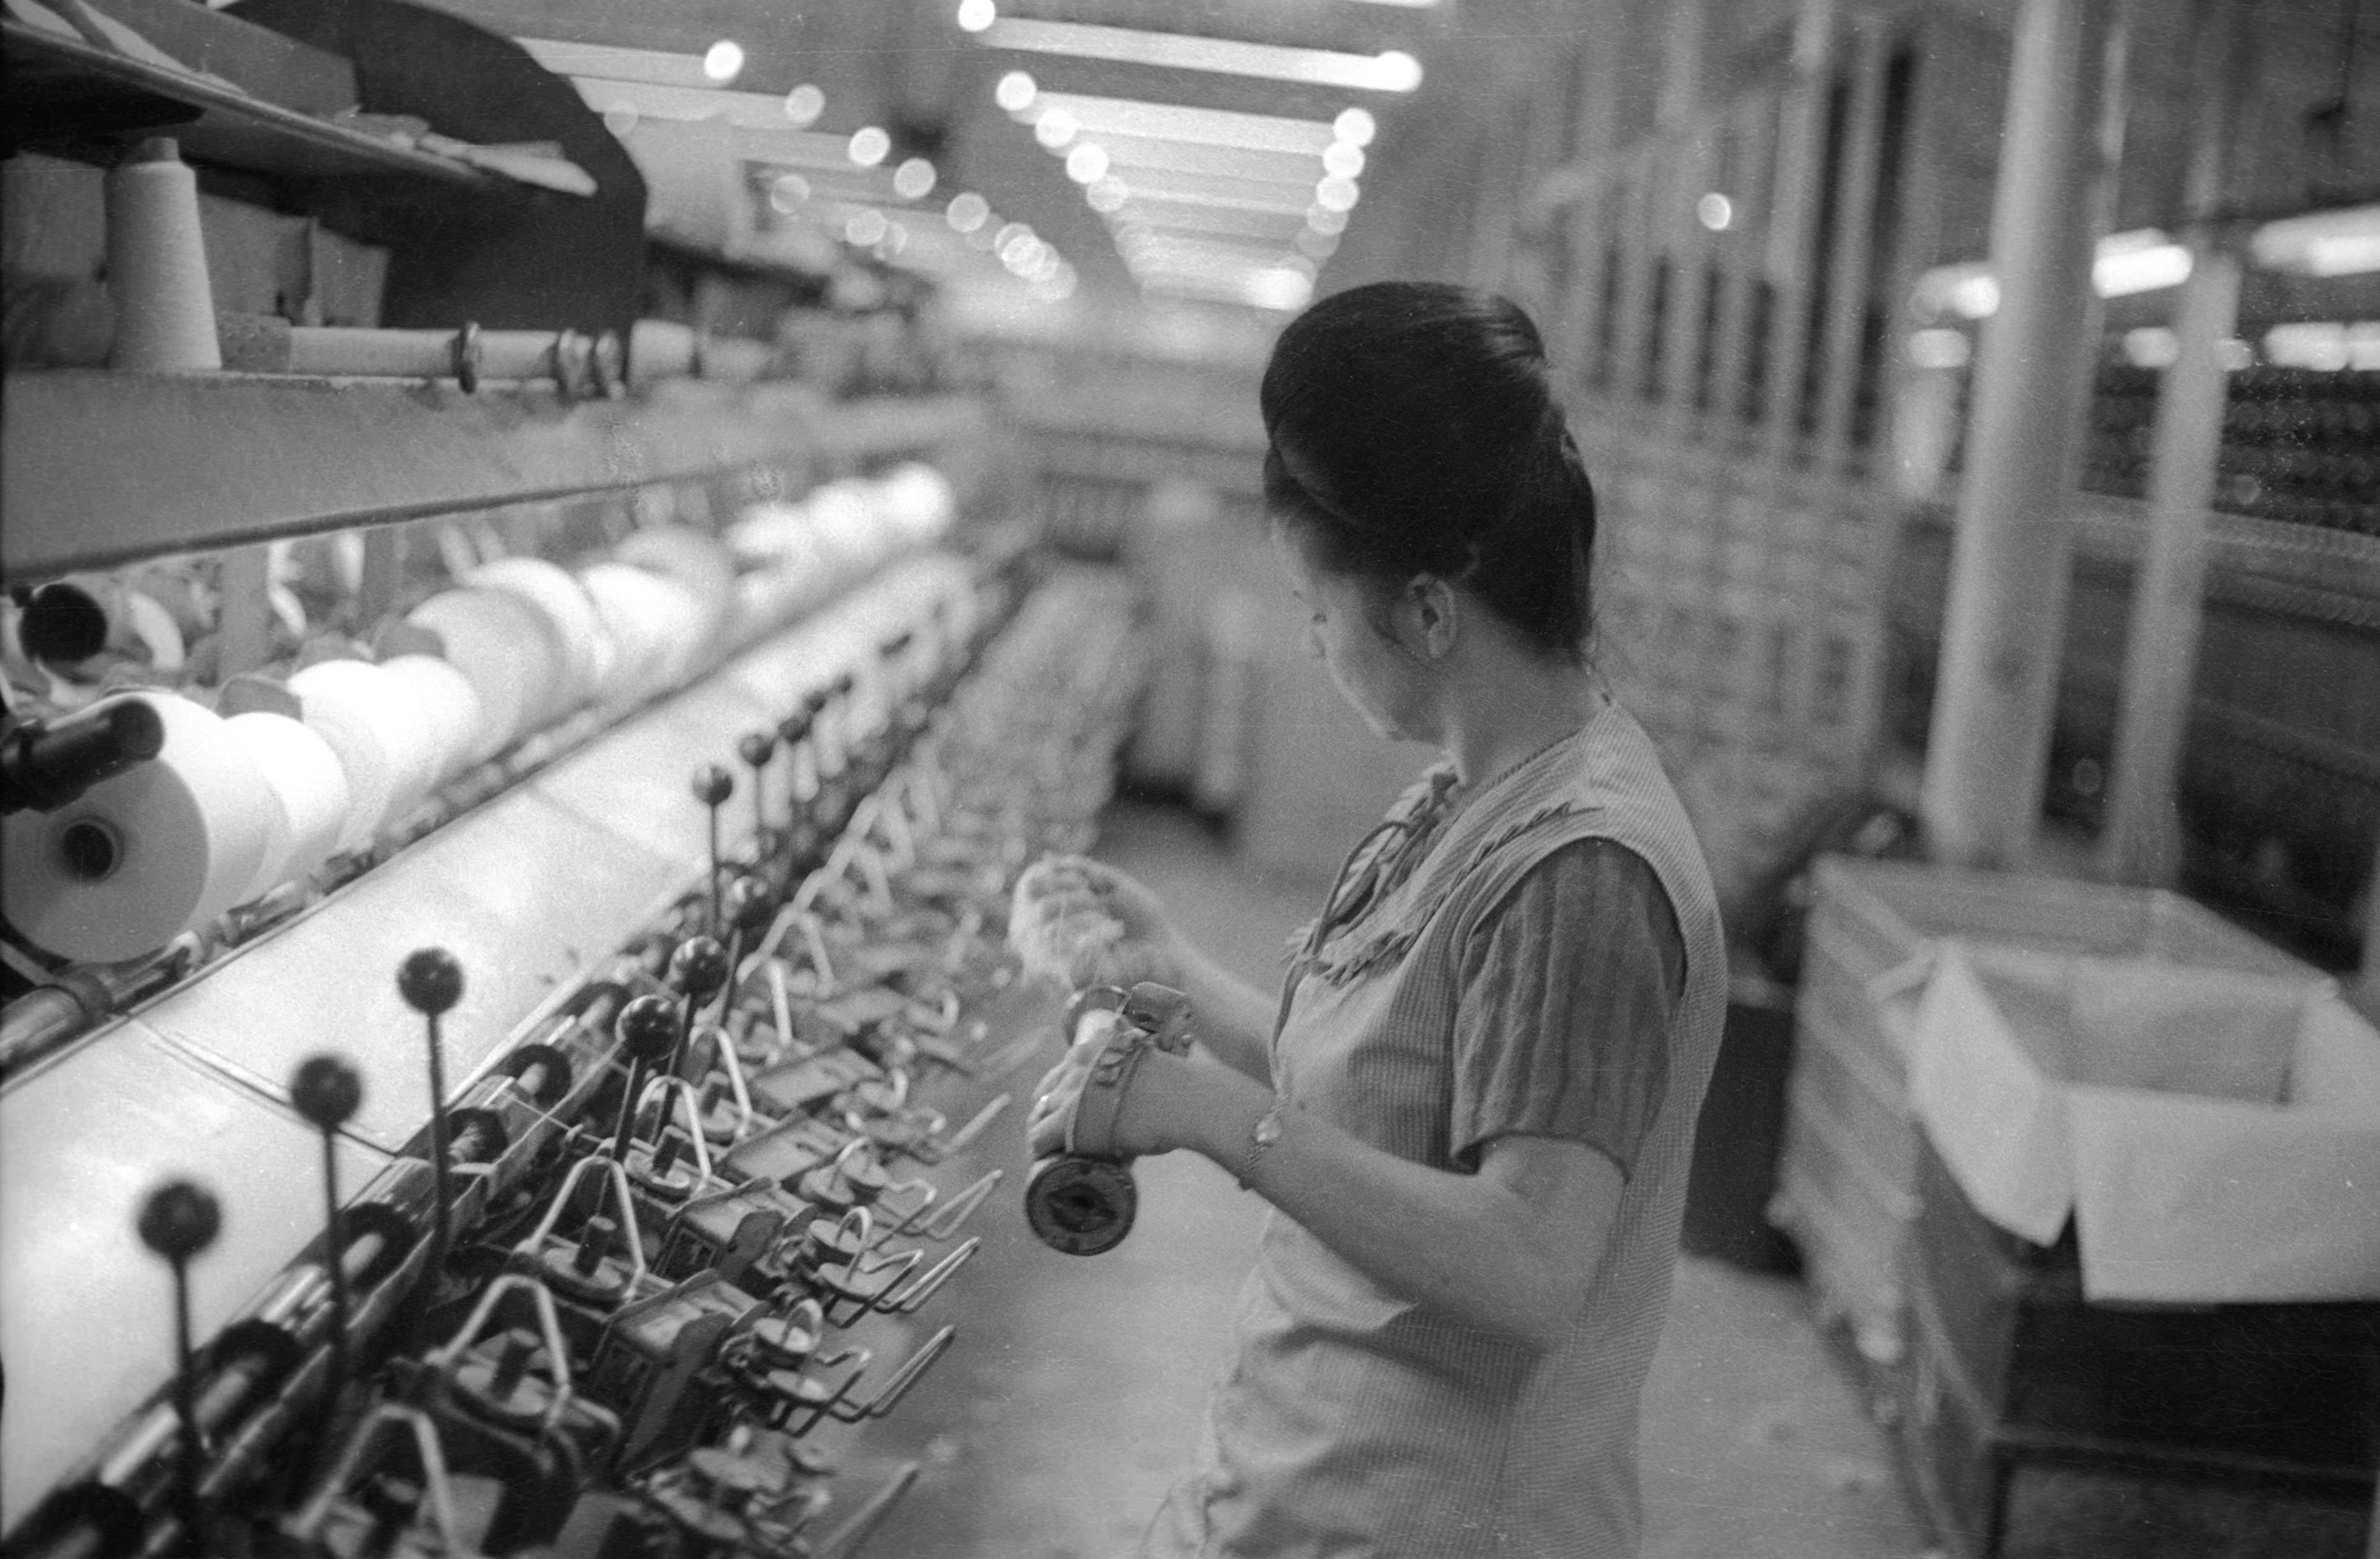 Darcy Lange, A Documentation of Bradford Working Life, UK, 1974, black-and-white photograph. Courtesy of the artist's estate